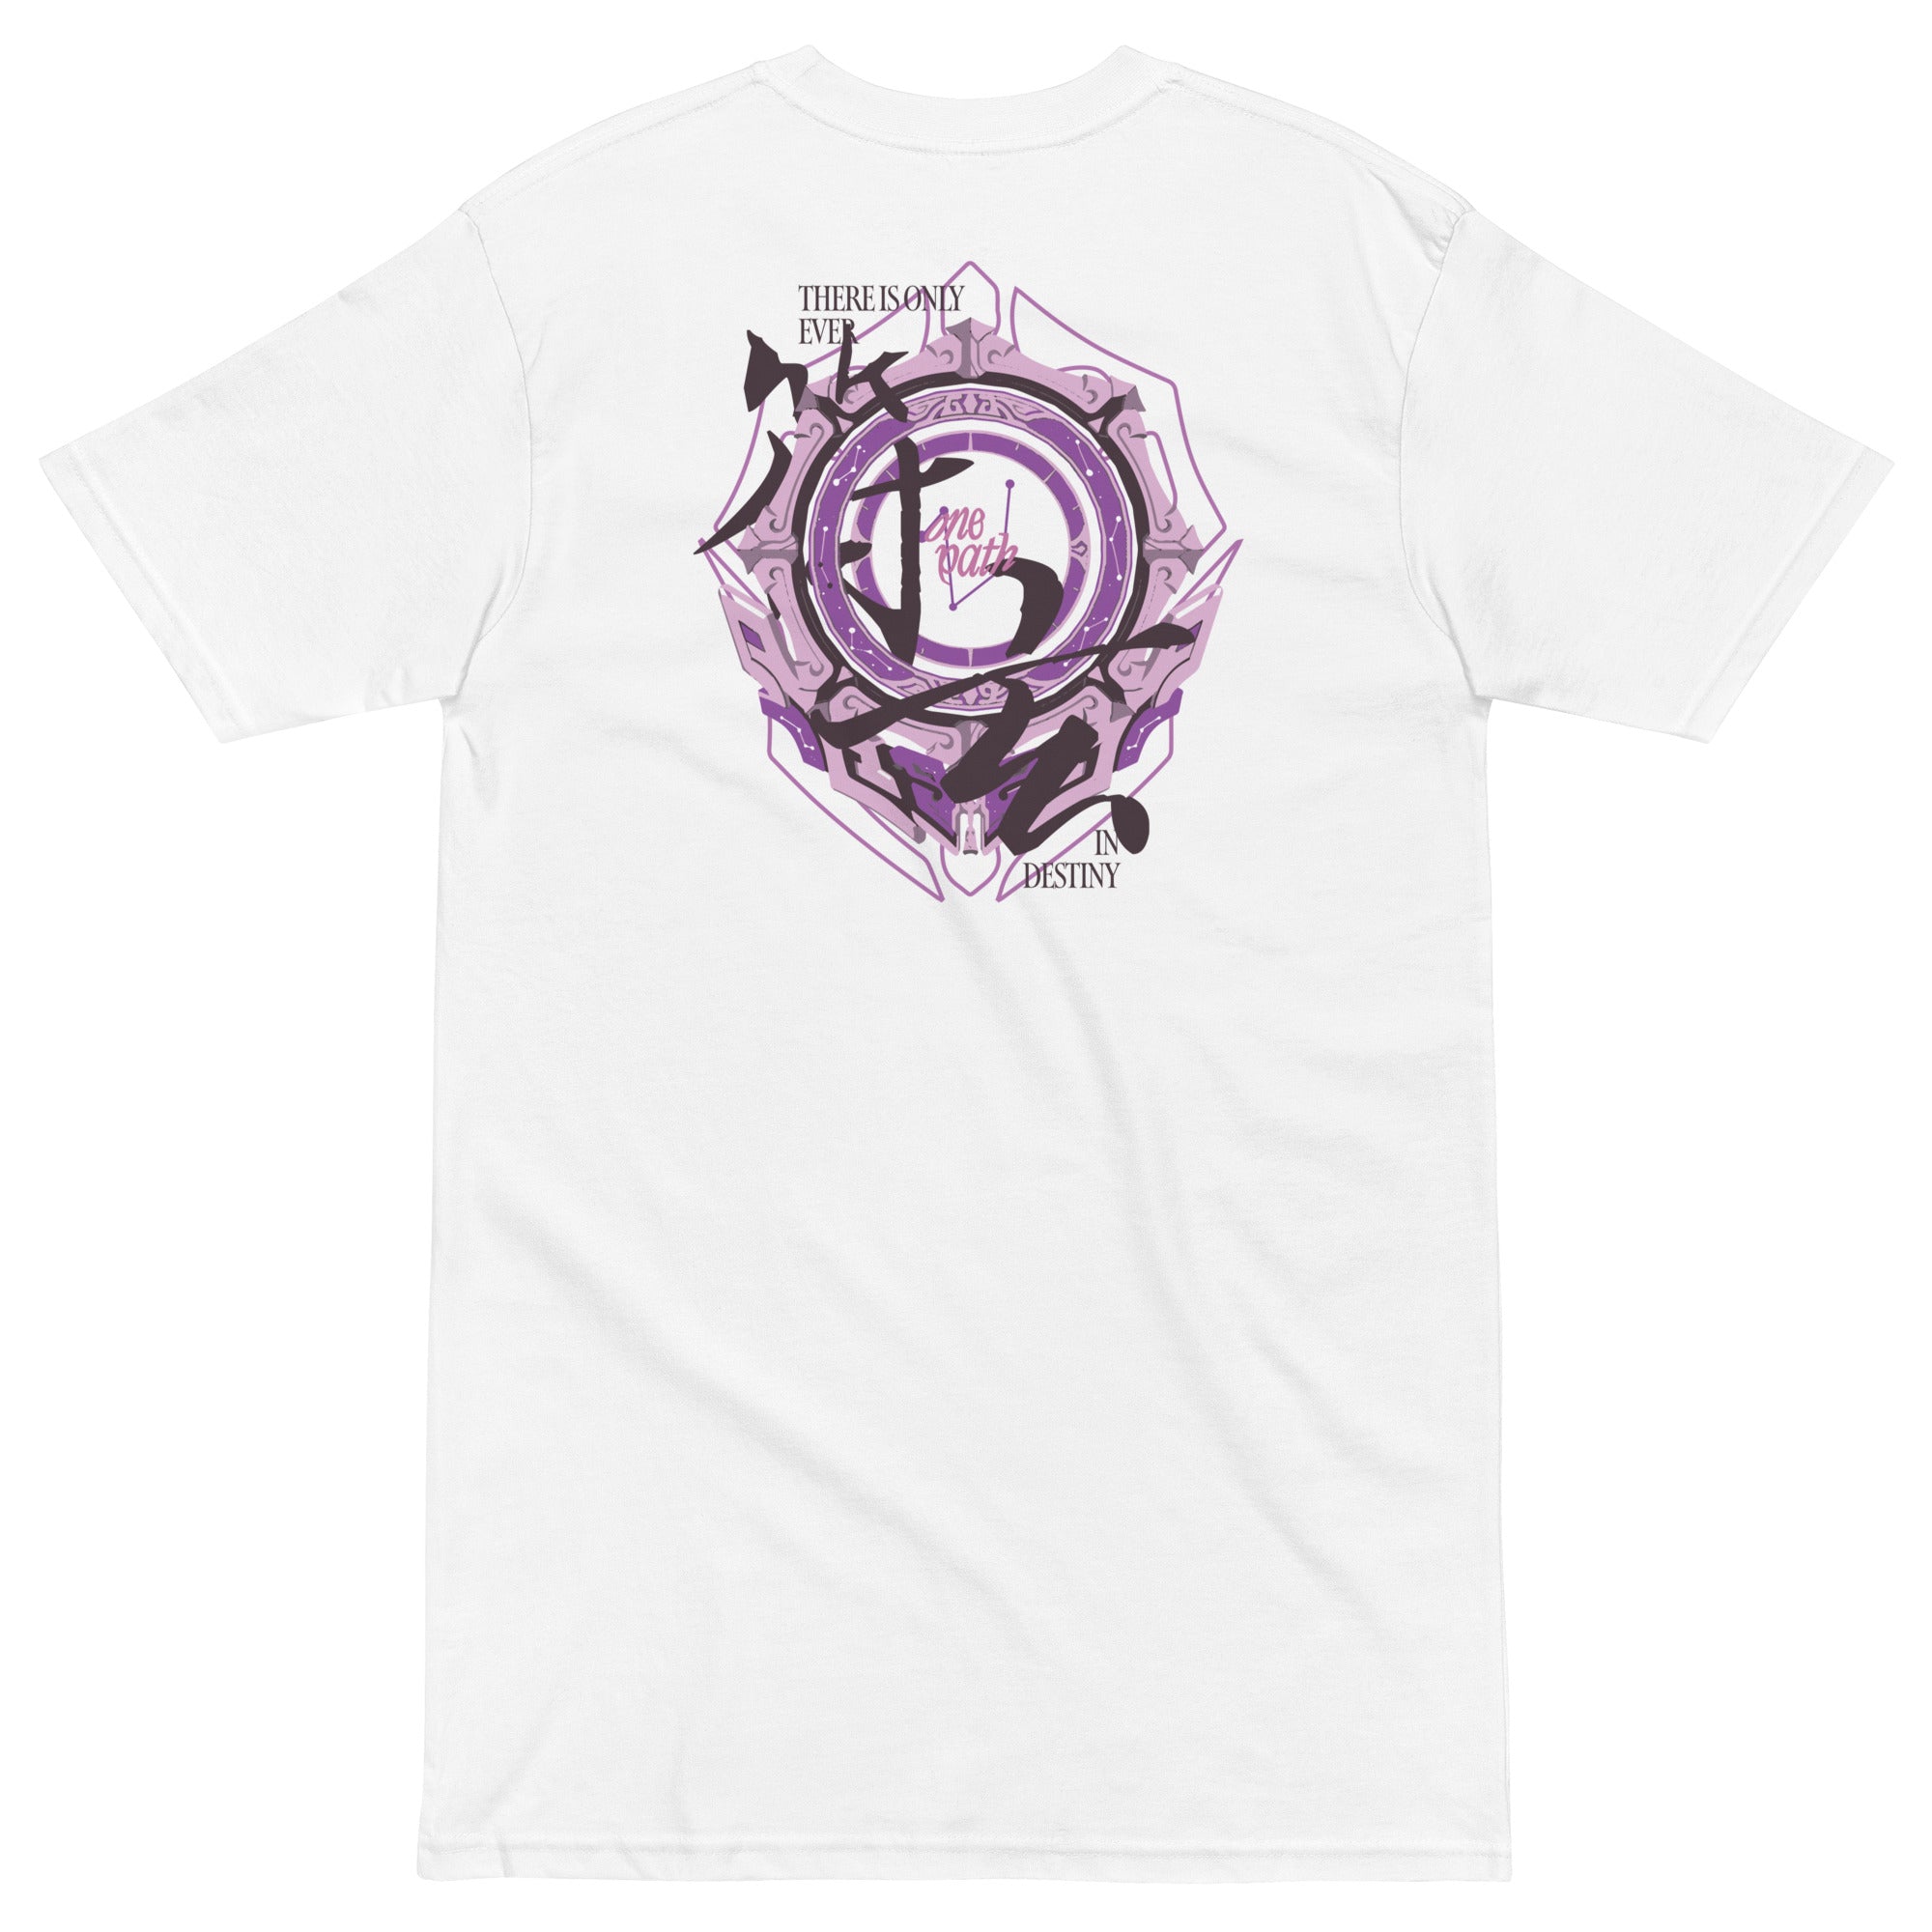 FATES • t-shirt - Jackler - anime-inspired streetwear - anime clothing